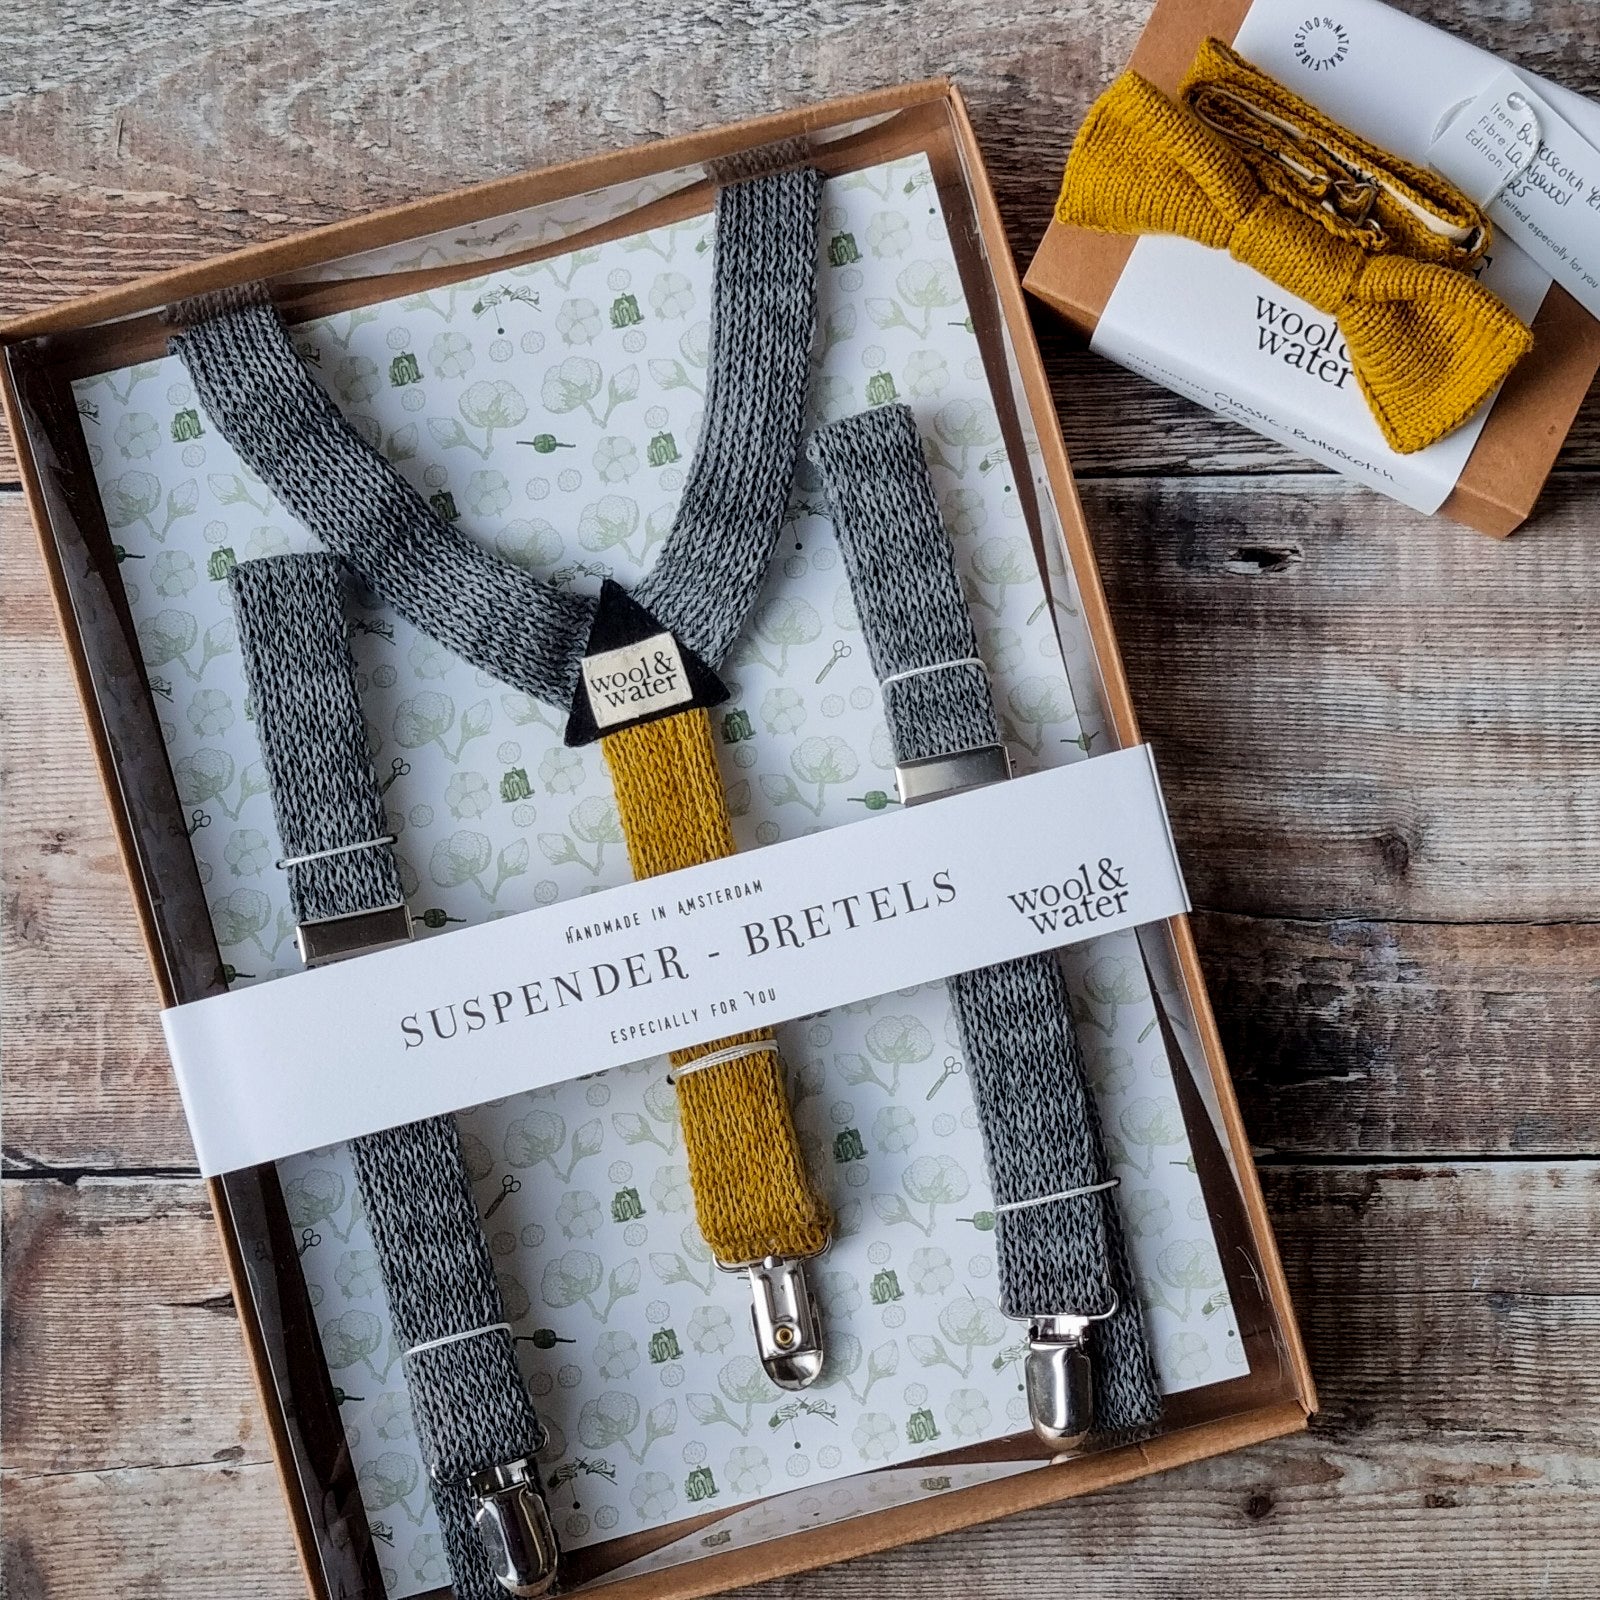 A pair of grey knitted suspenders with butterscotch yellow back in their Wool & Water packaging